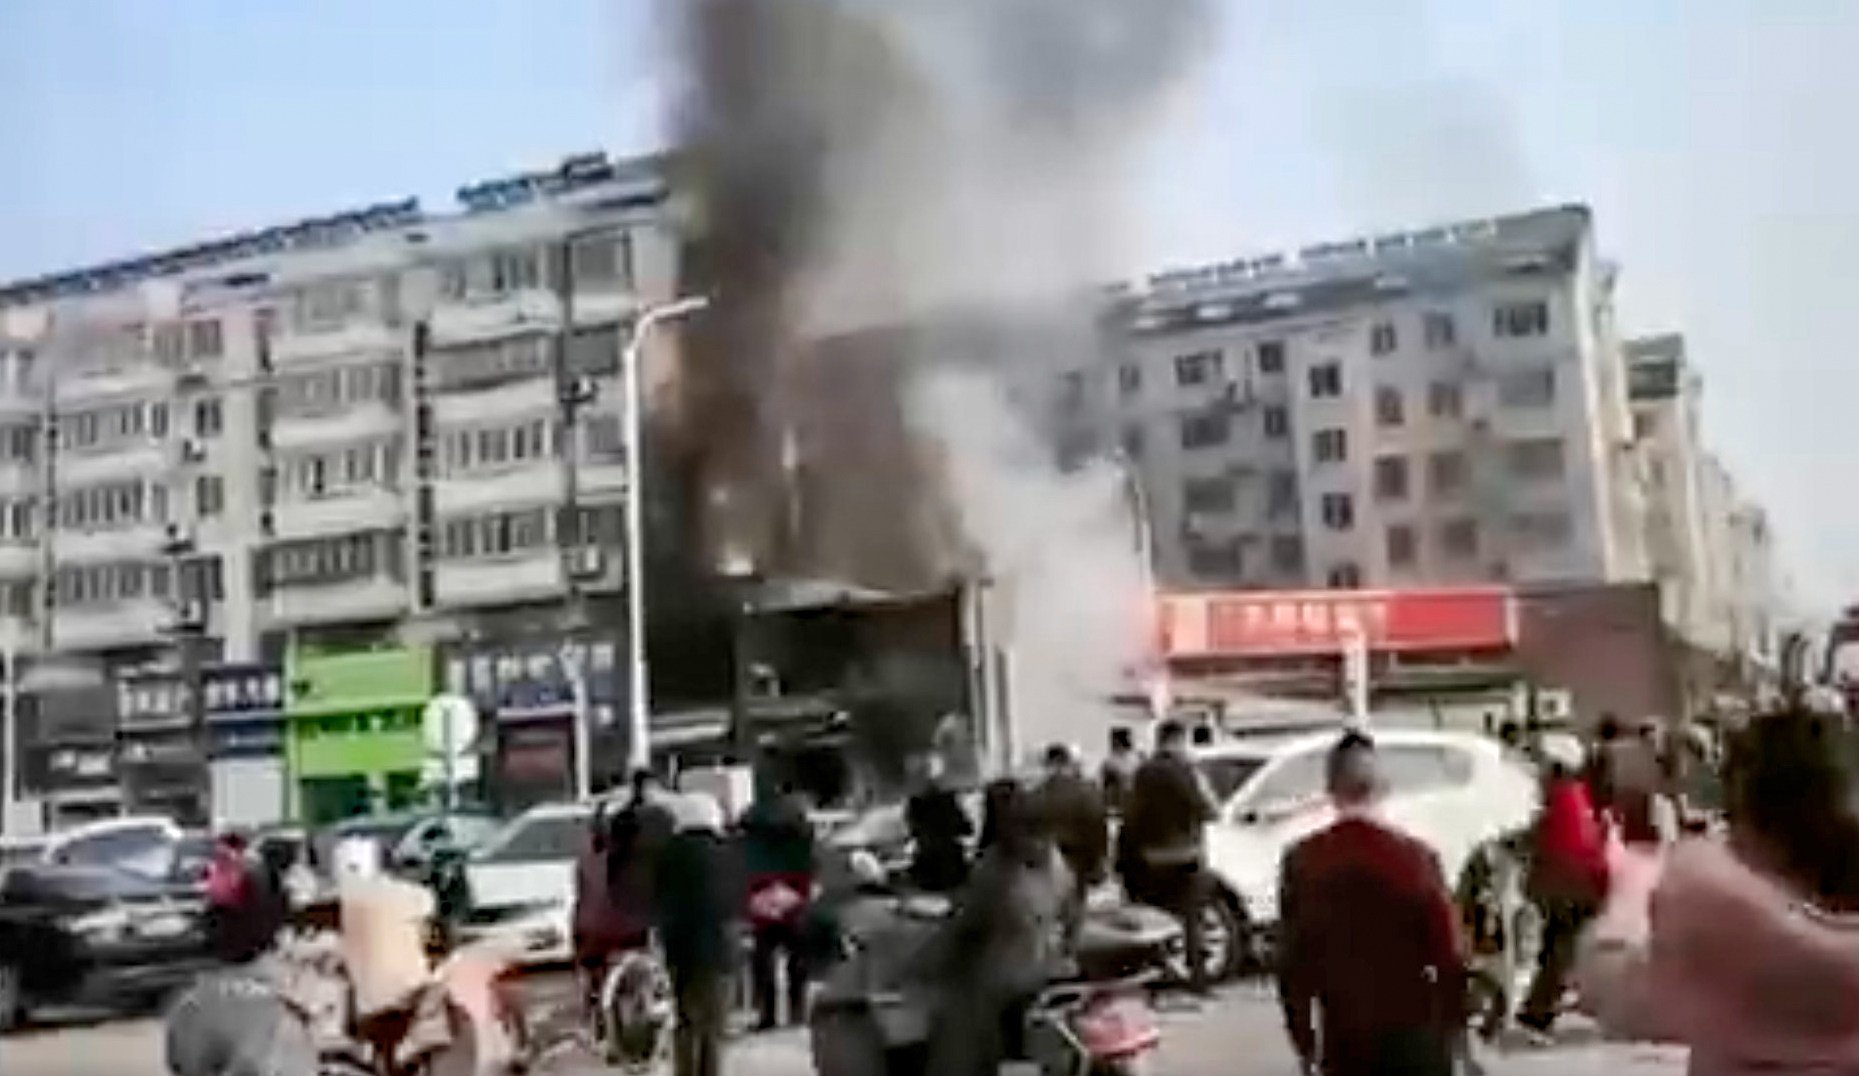 The explosion erupted at a barbecue restaurant in Huaian, Jiangsu province, on Saturday afternoon. Photo: Weibo